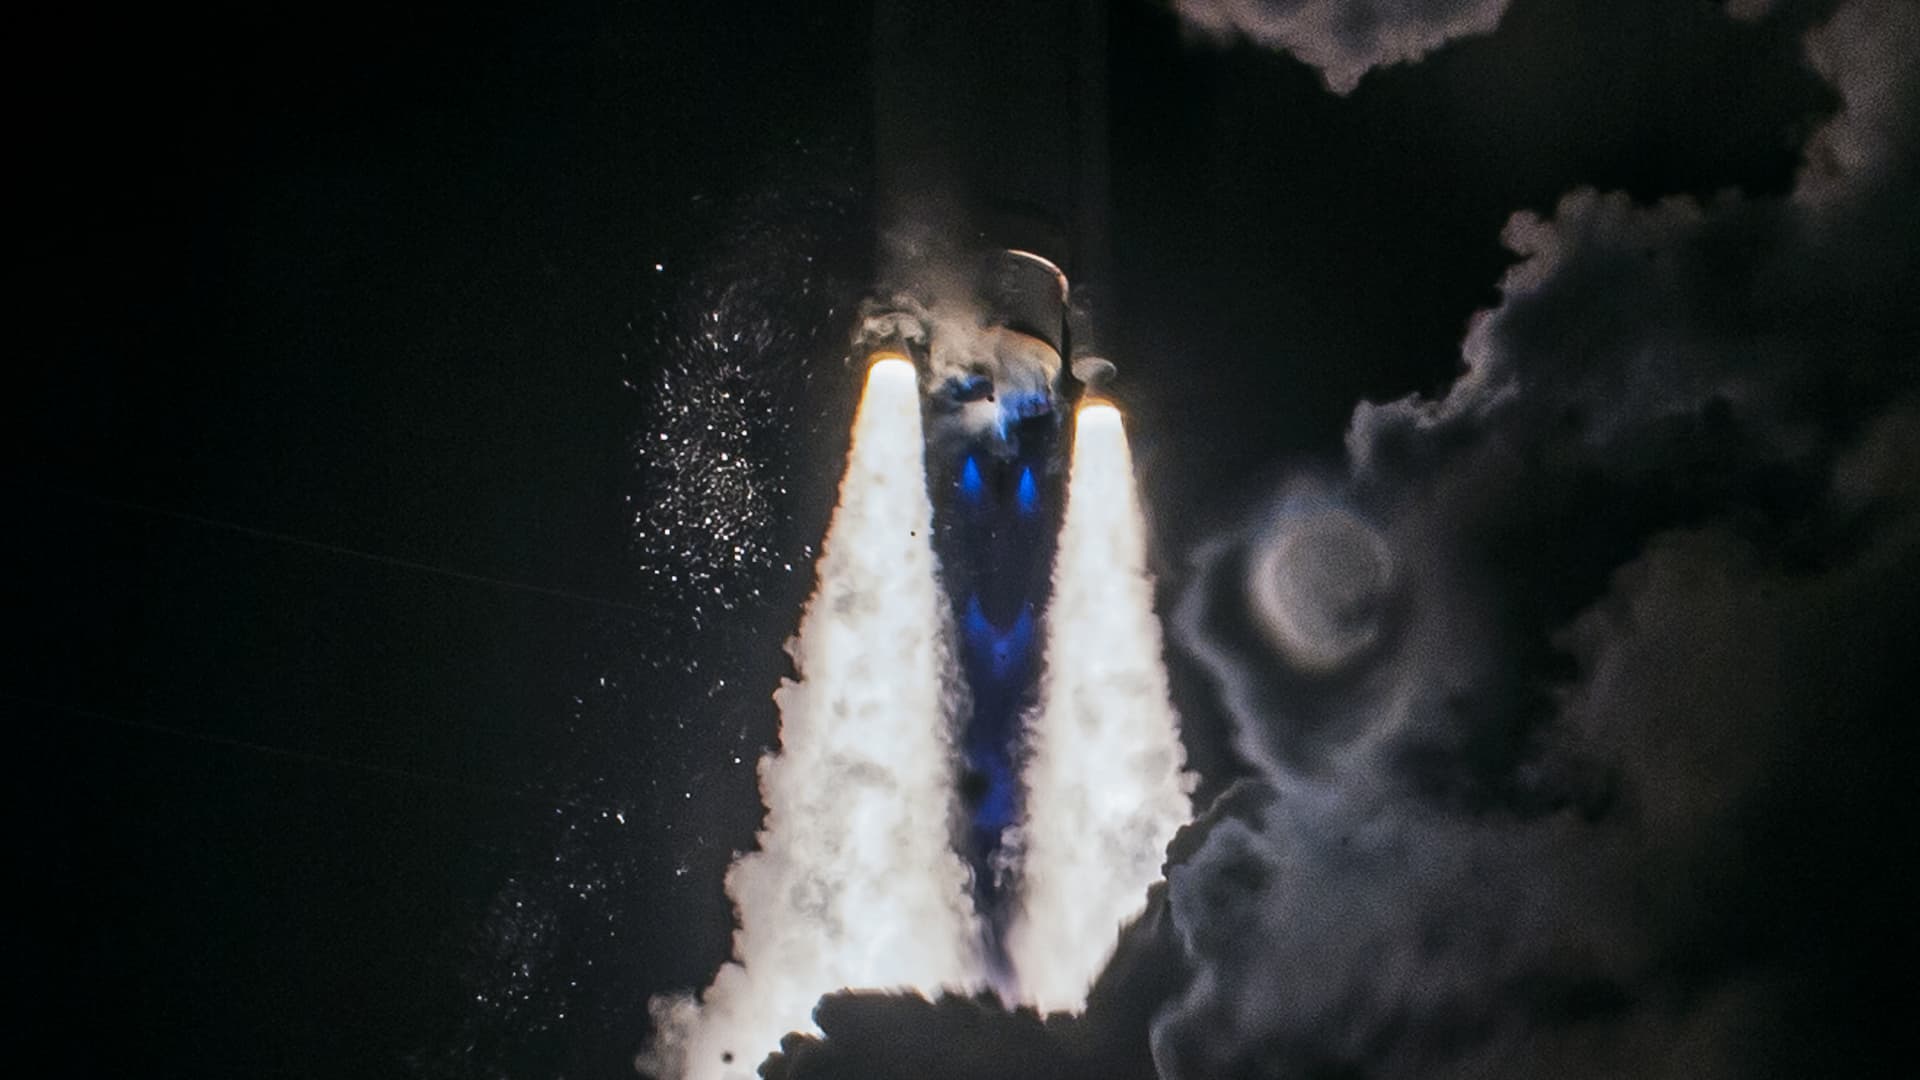 ULA Vulcan rocket launches as newest challenger to SpaceX